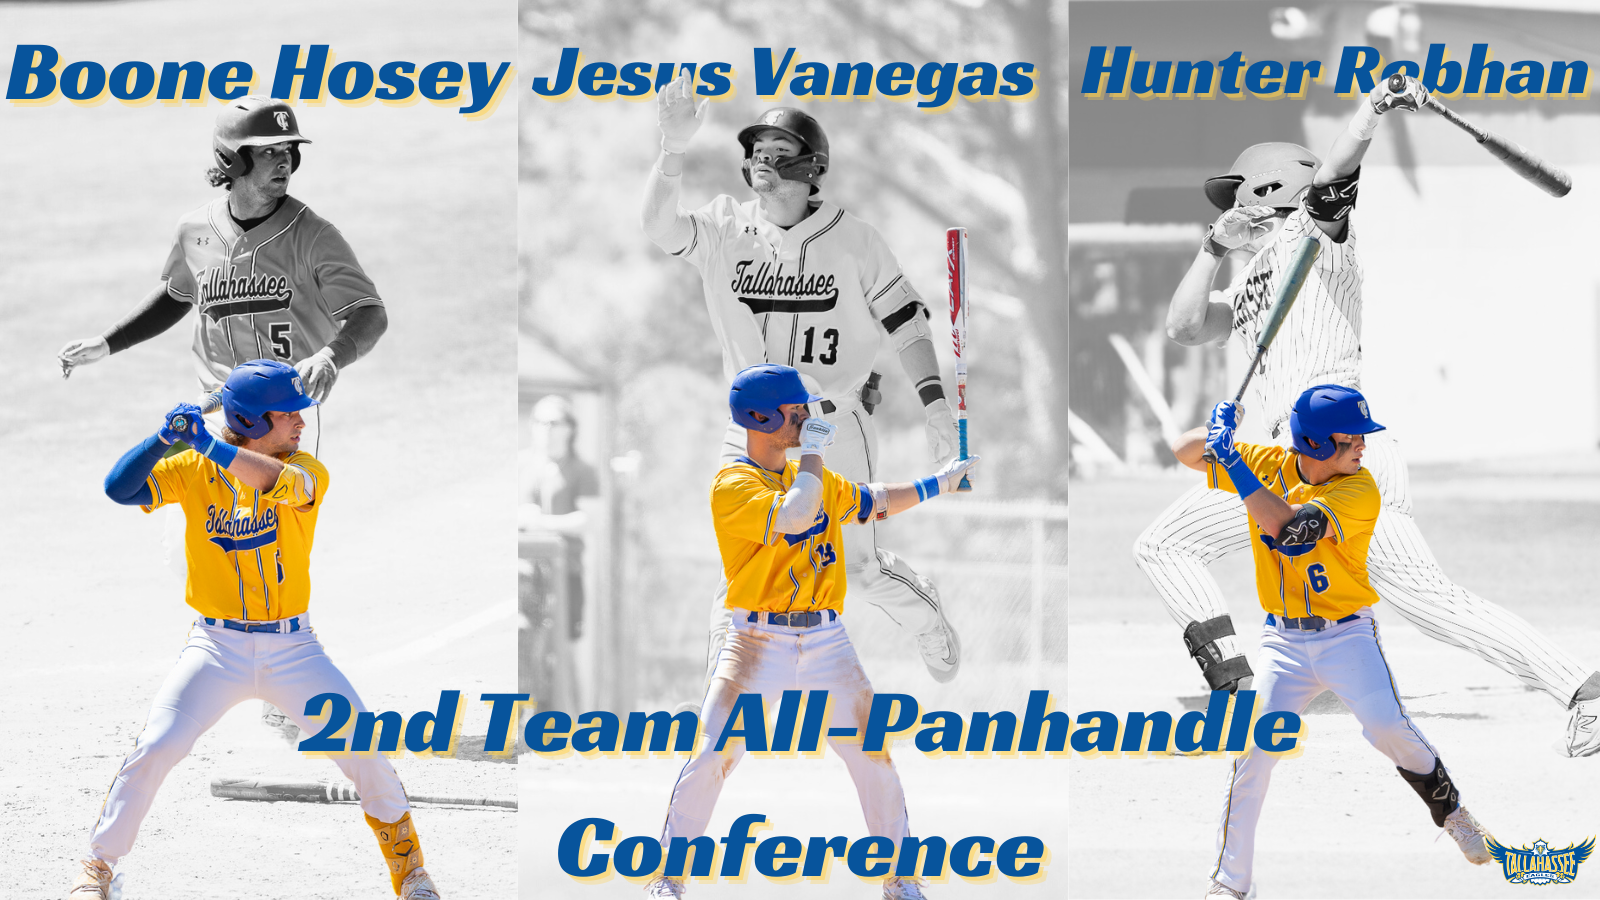 Three TCC Baseball Players Named to All-Panhandle Conference Team